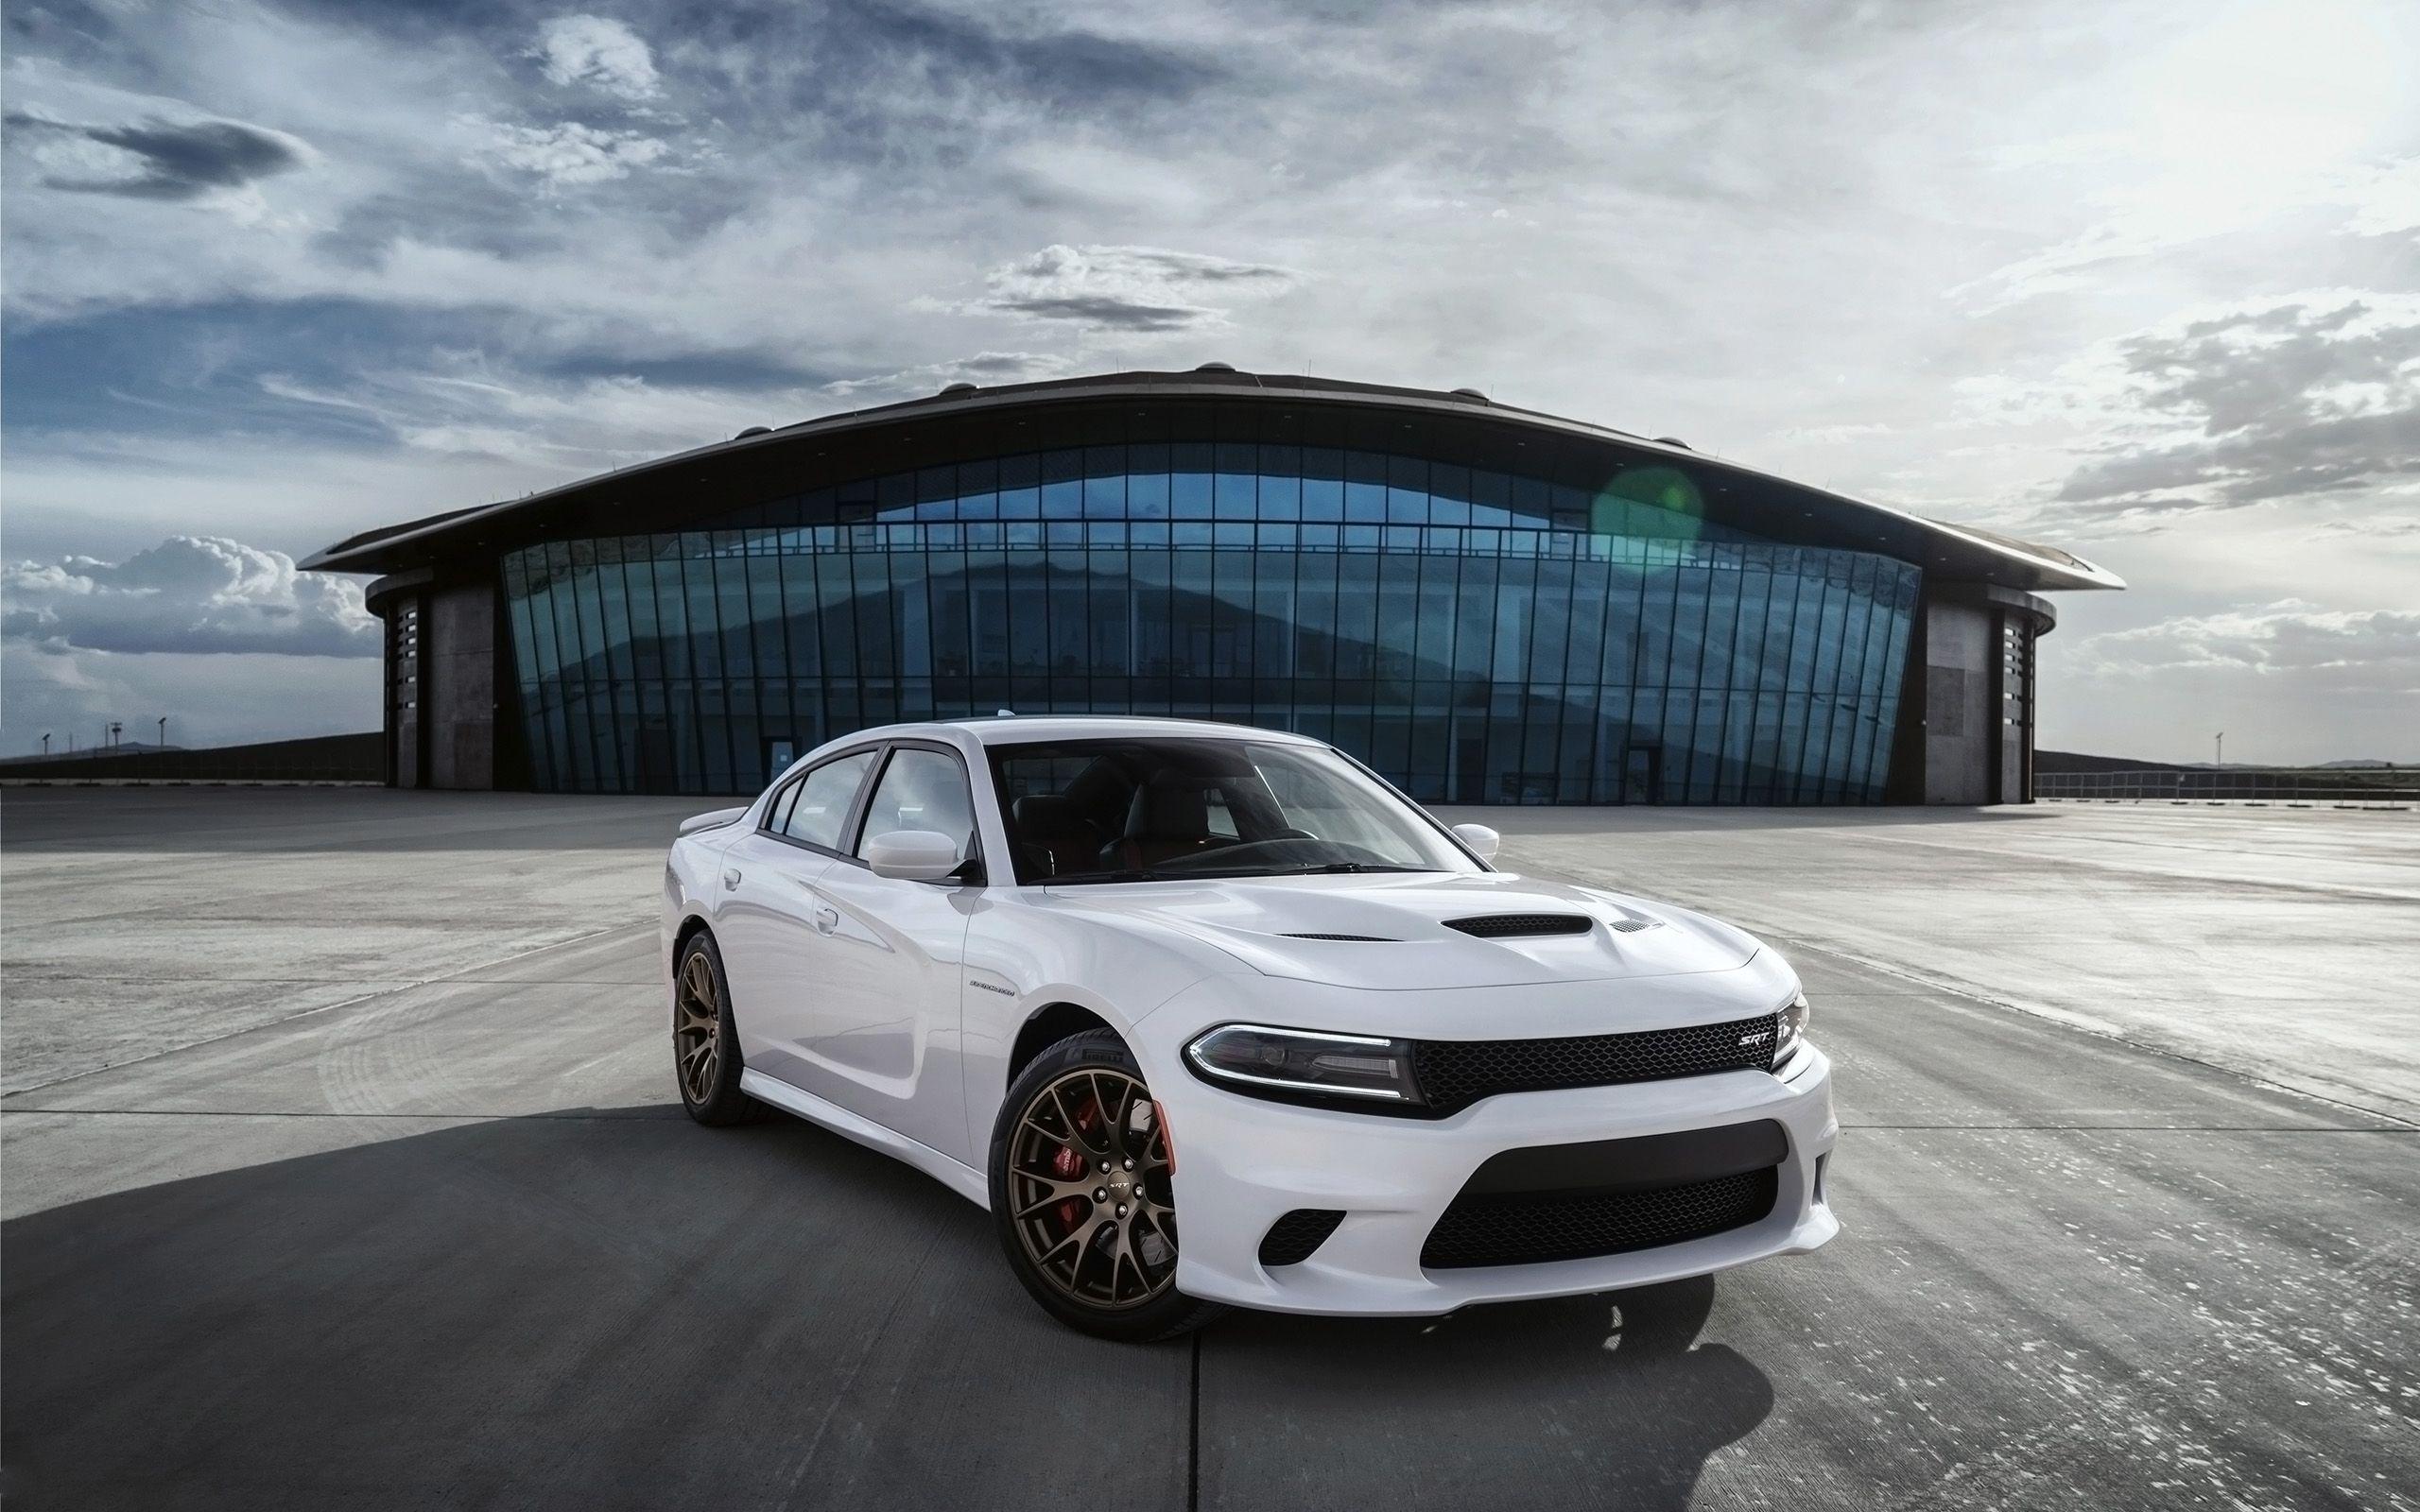 120+ Dodge Charger HD Wallpapers and Backgrounds